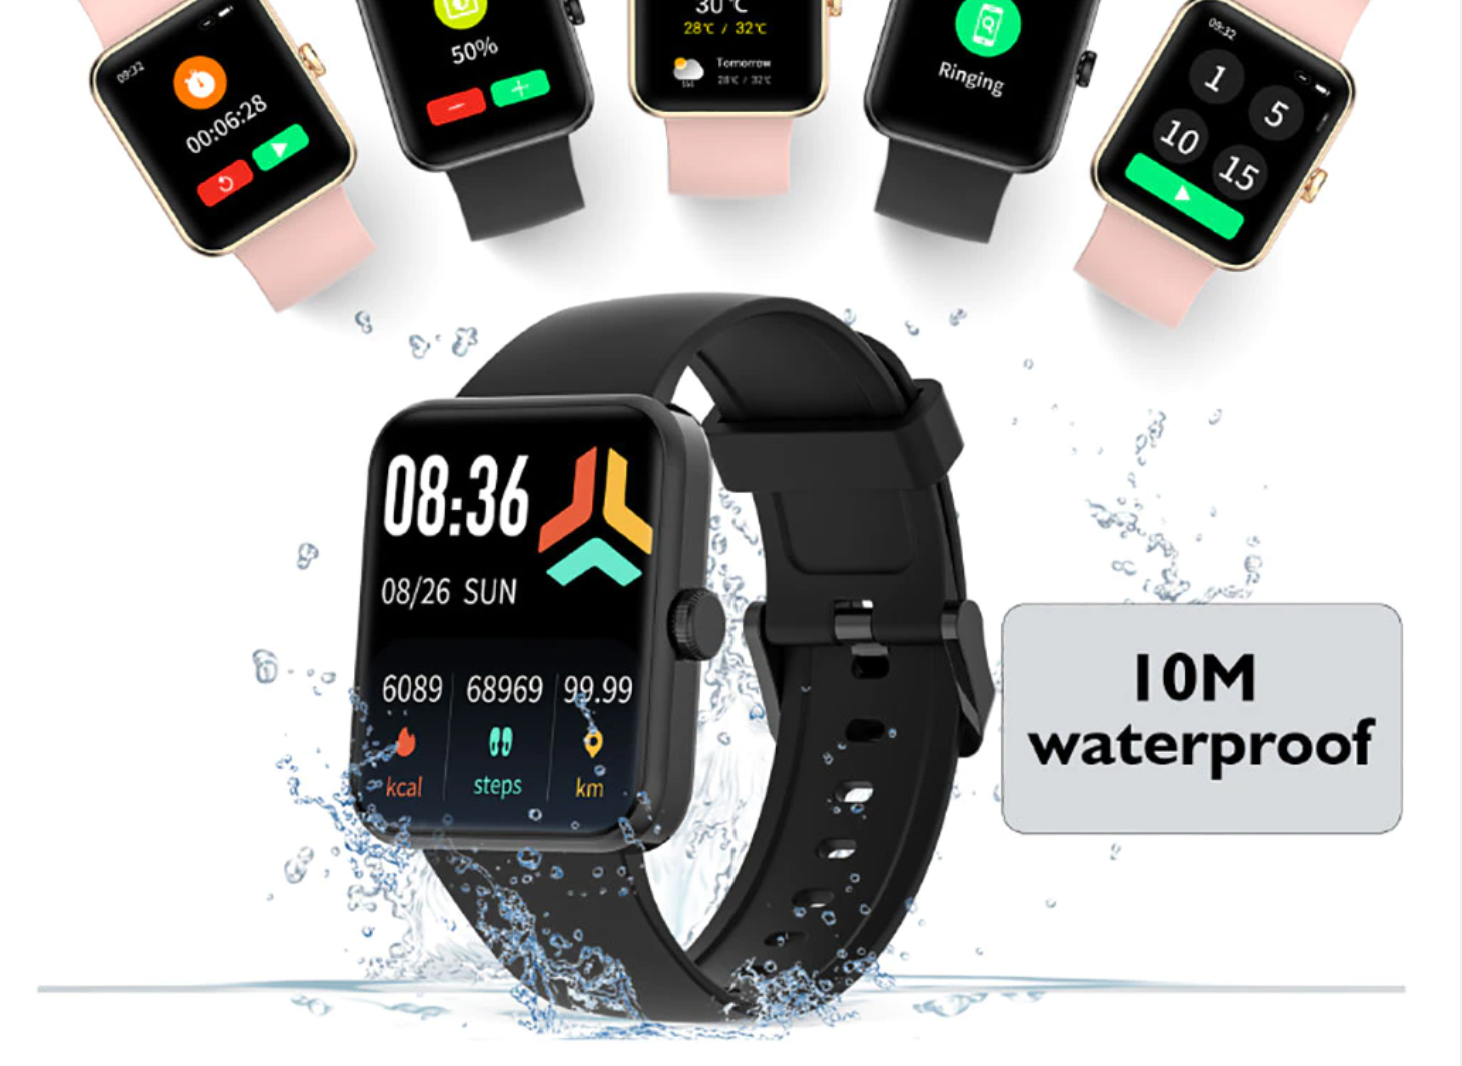 Blackview W10 & W10E Apple Watch-Lookalike Smartwatches Launched